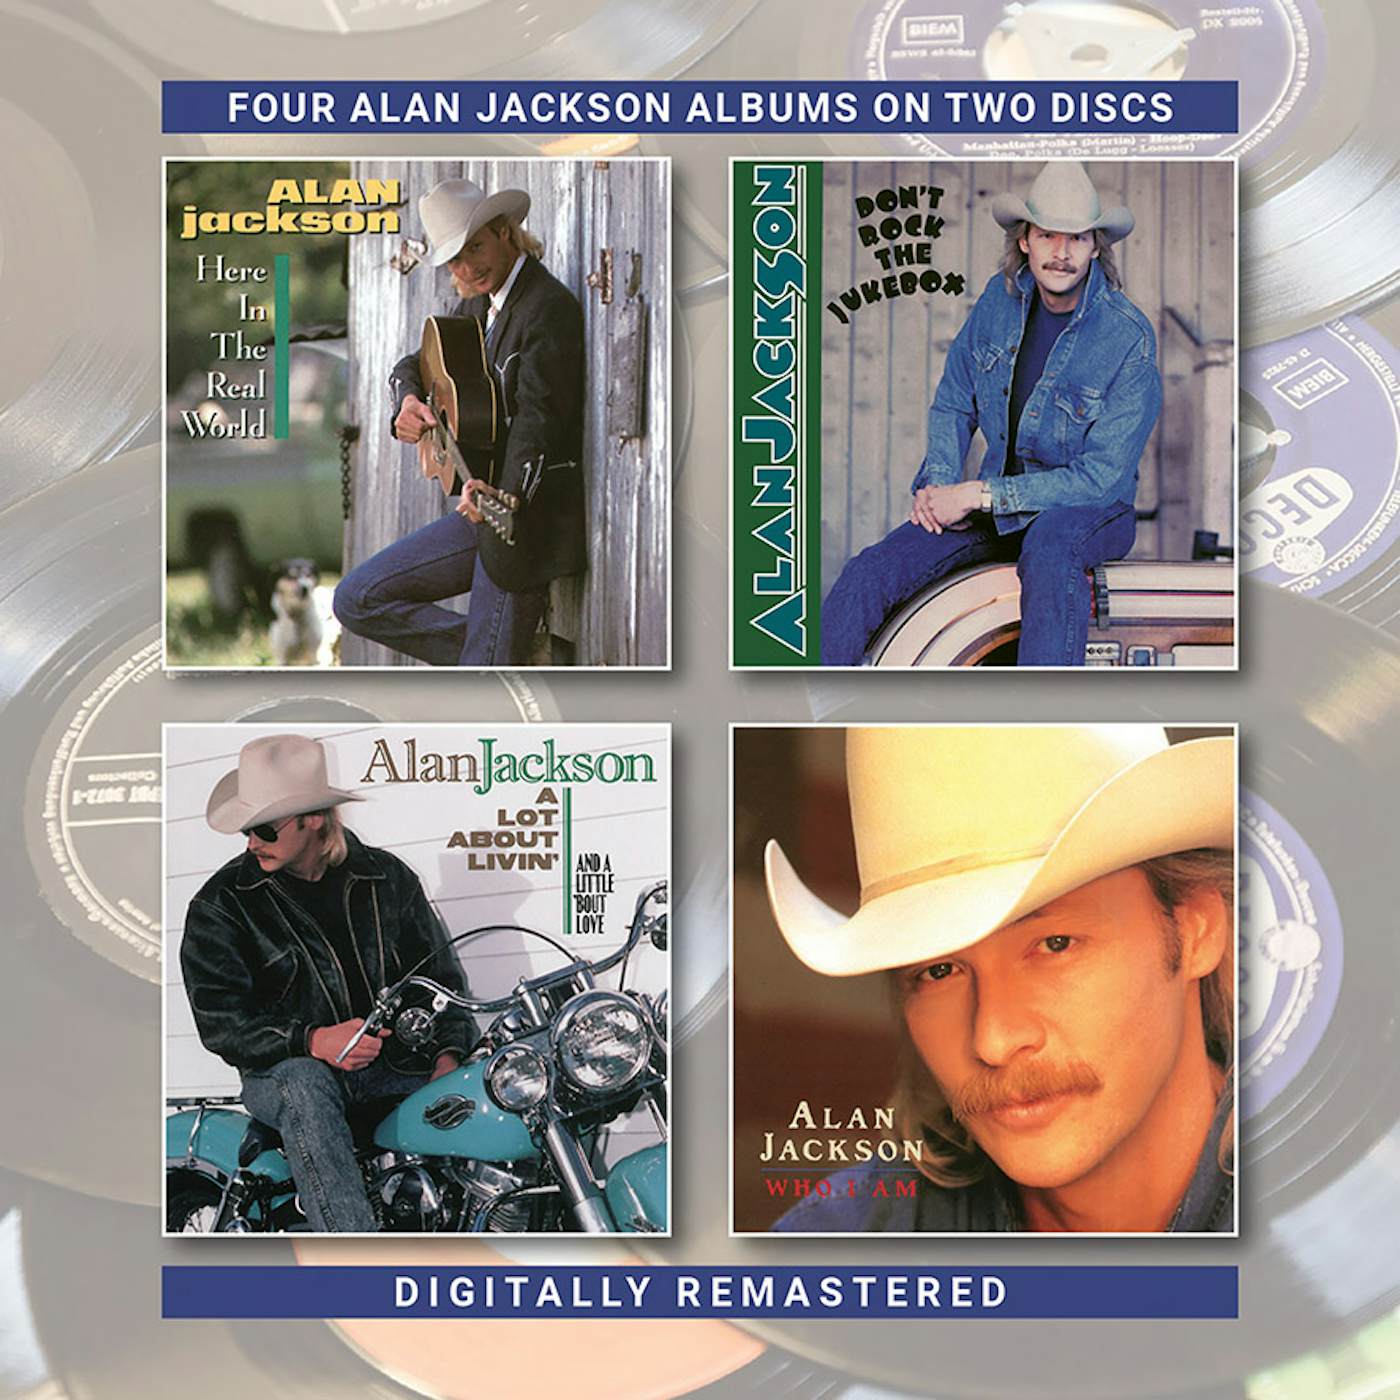 Alan Jackson HERE IN THE REAL WORLD / DON'T ROCK THE JUKEBOX CD